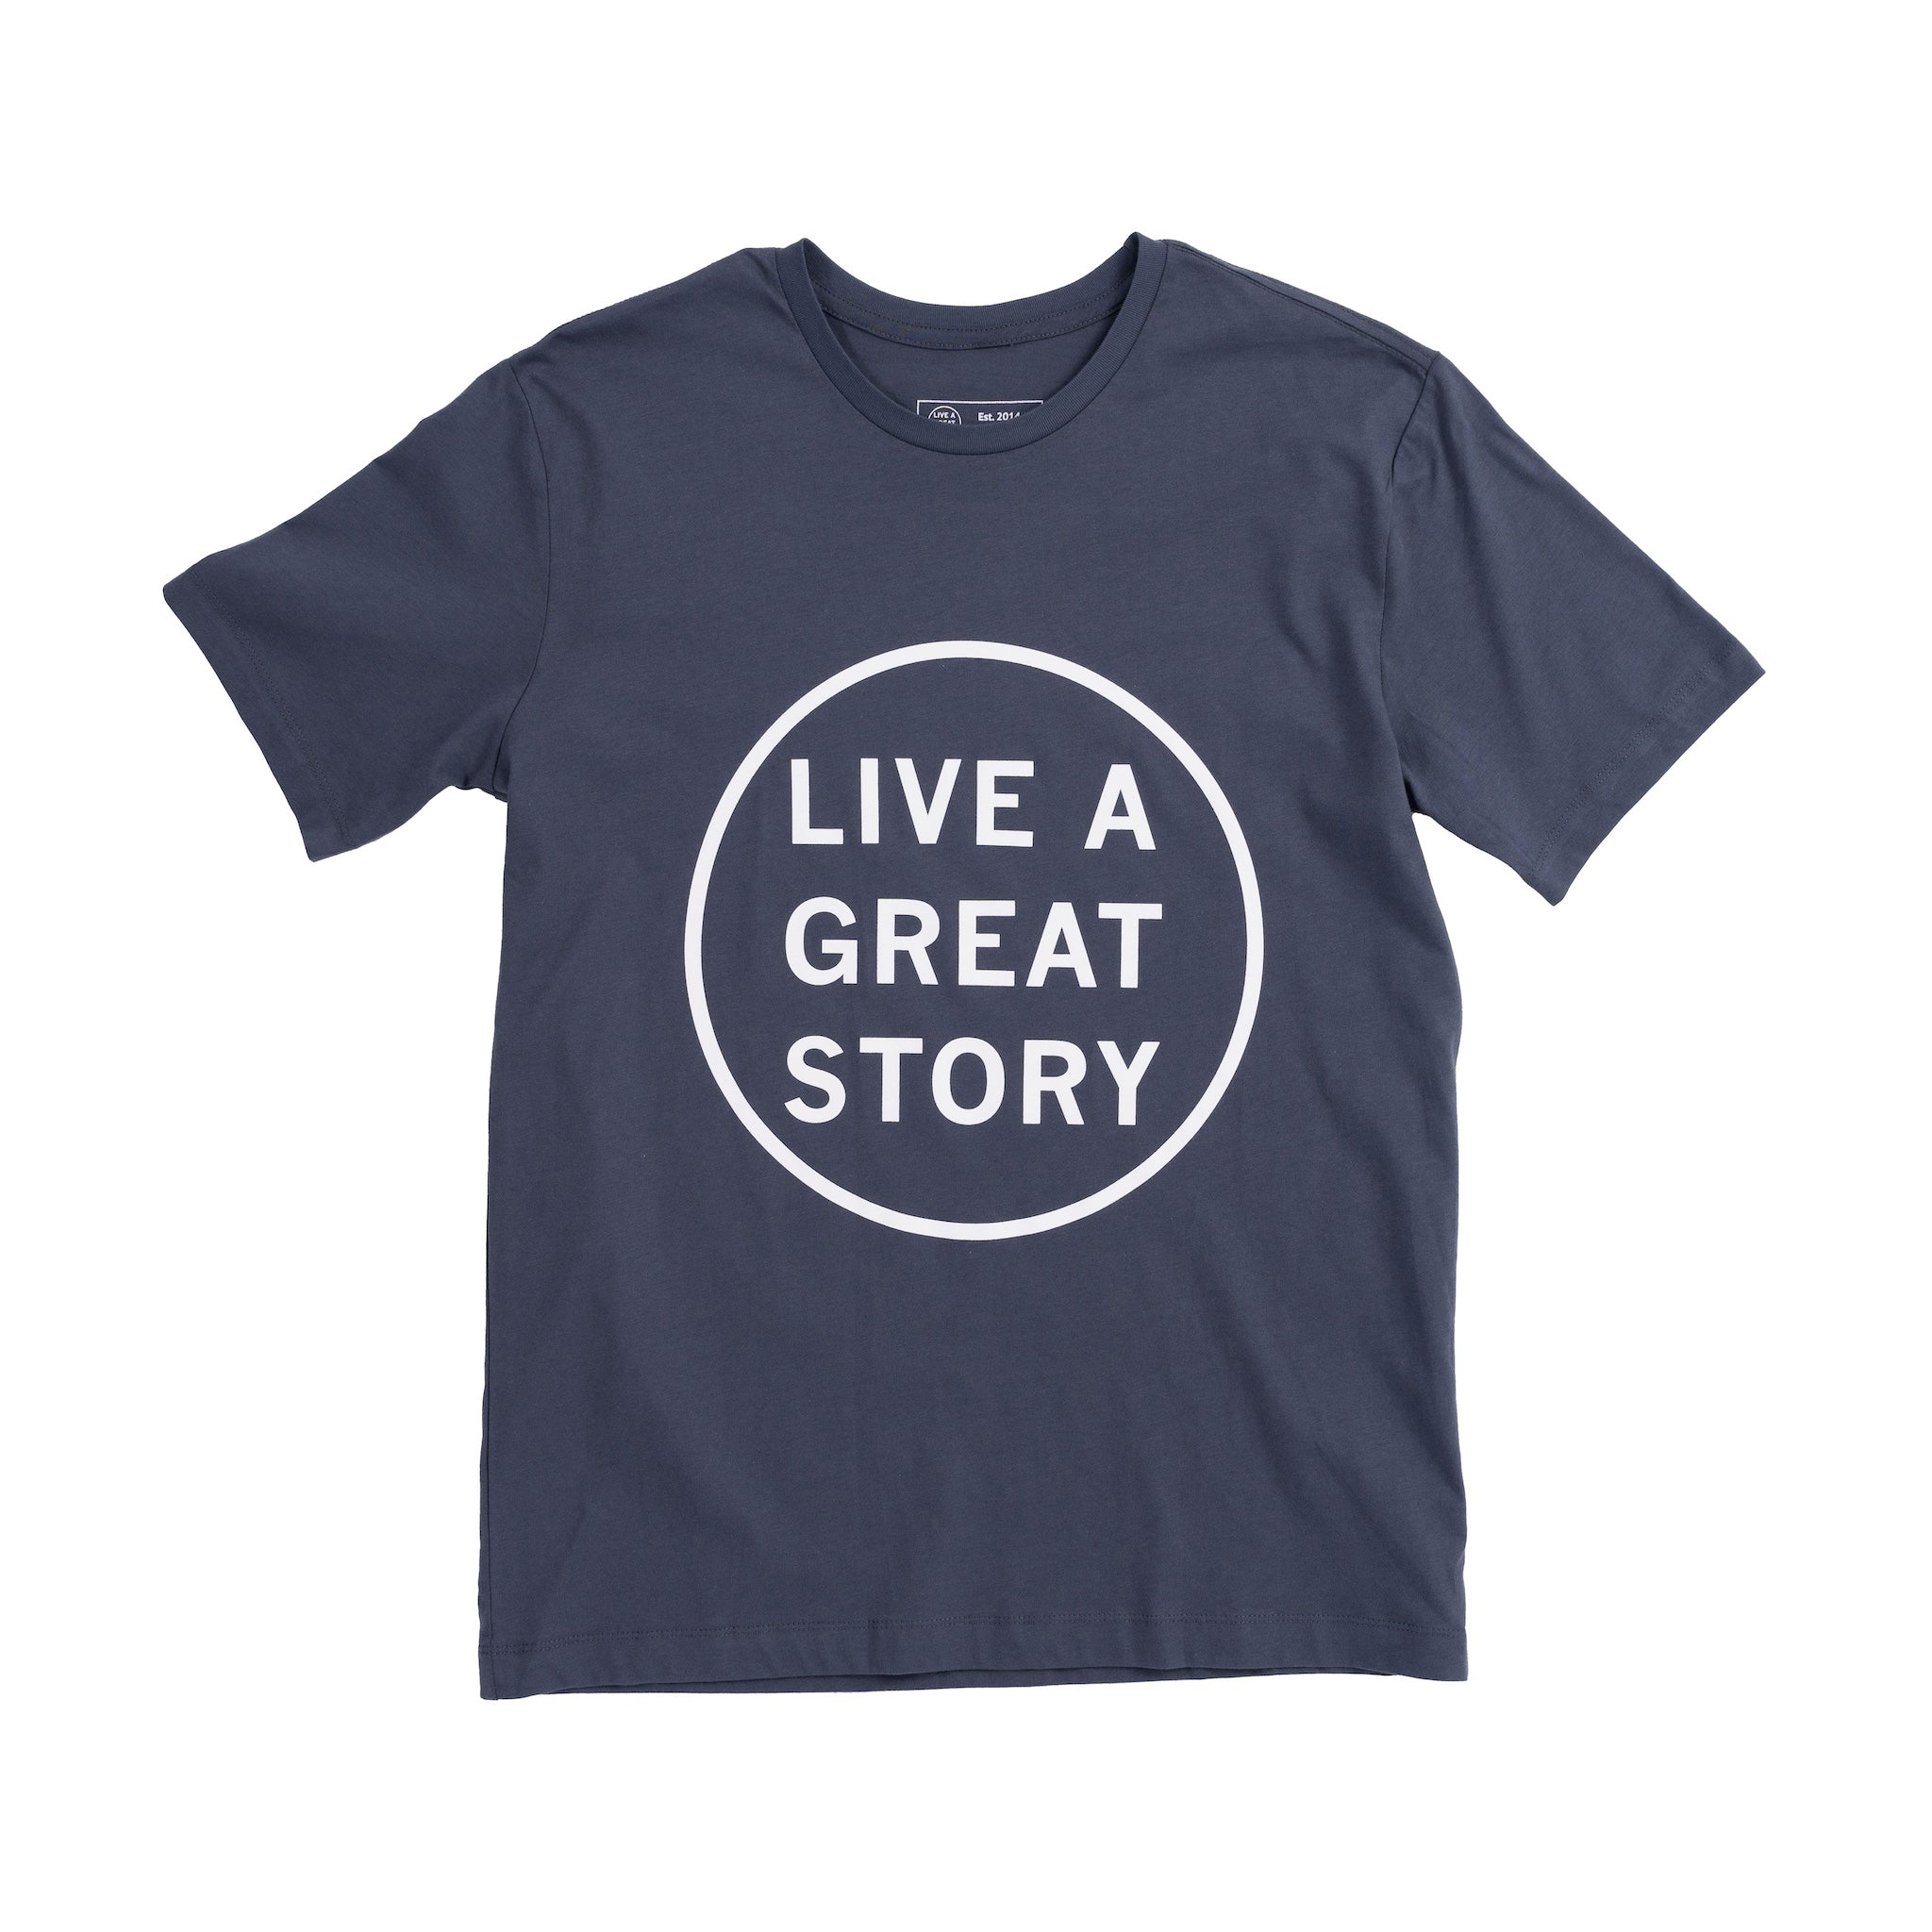 The front of a navy blue LIVE A GREAT STORY Unisex T-Shirt